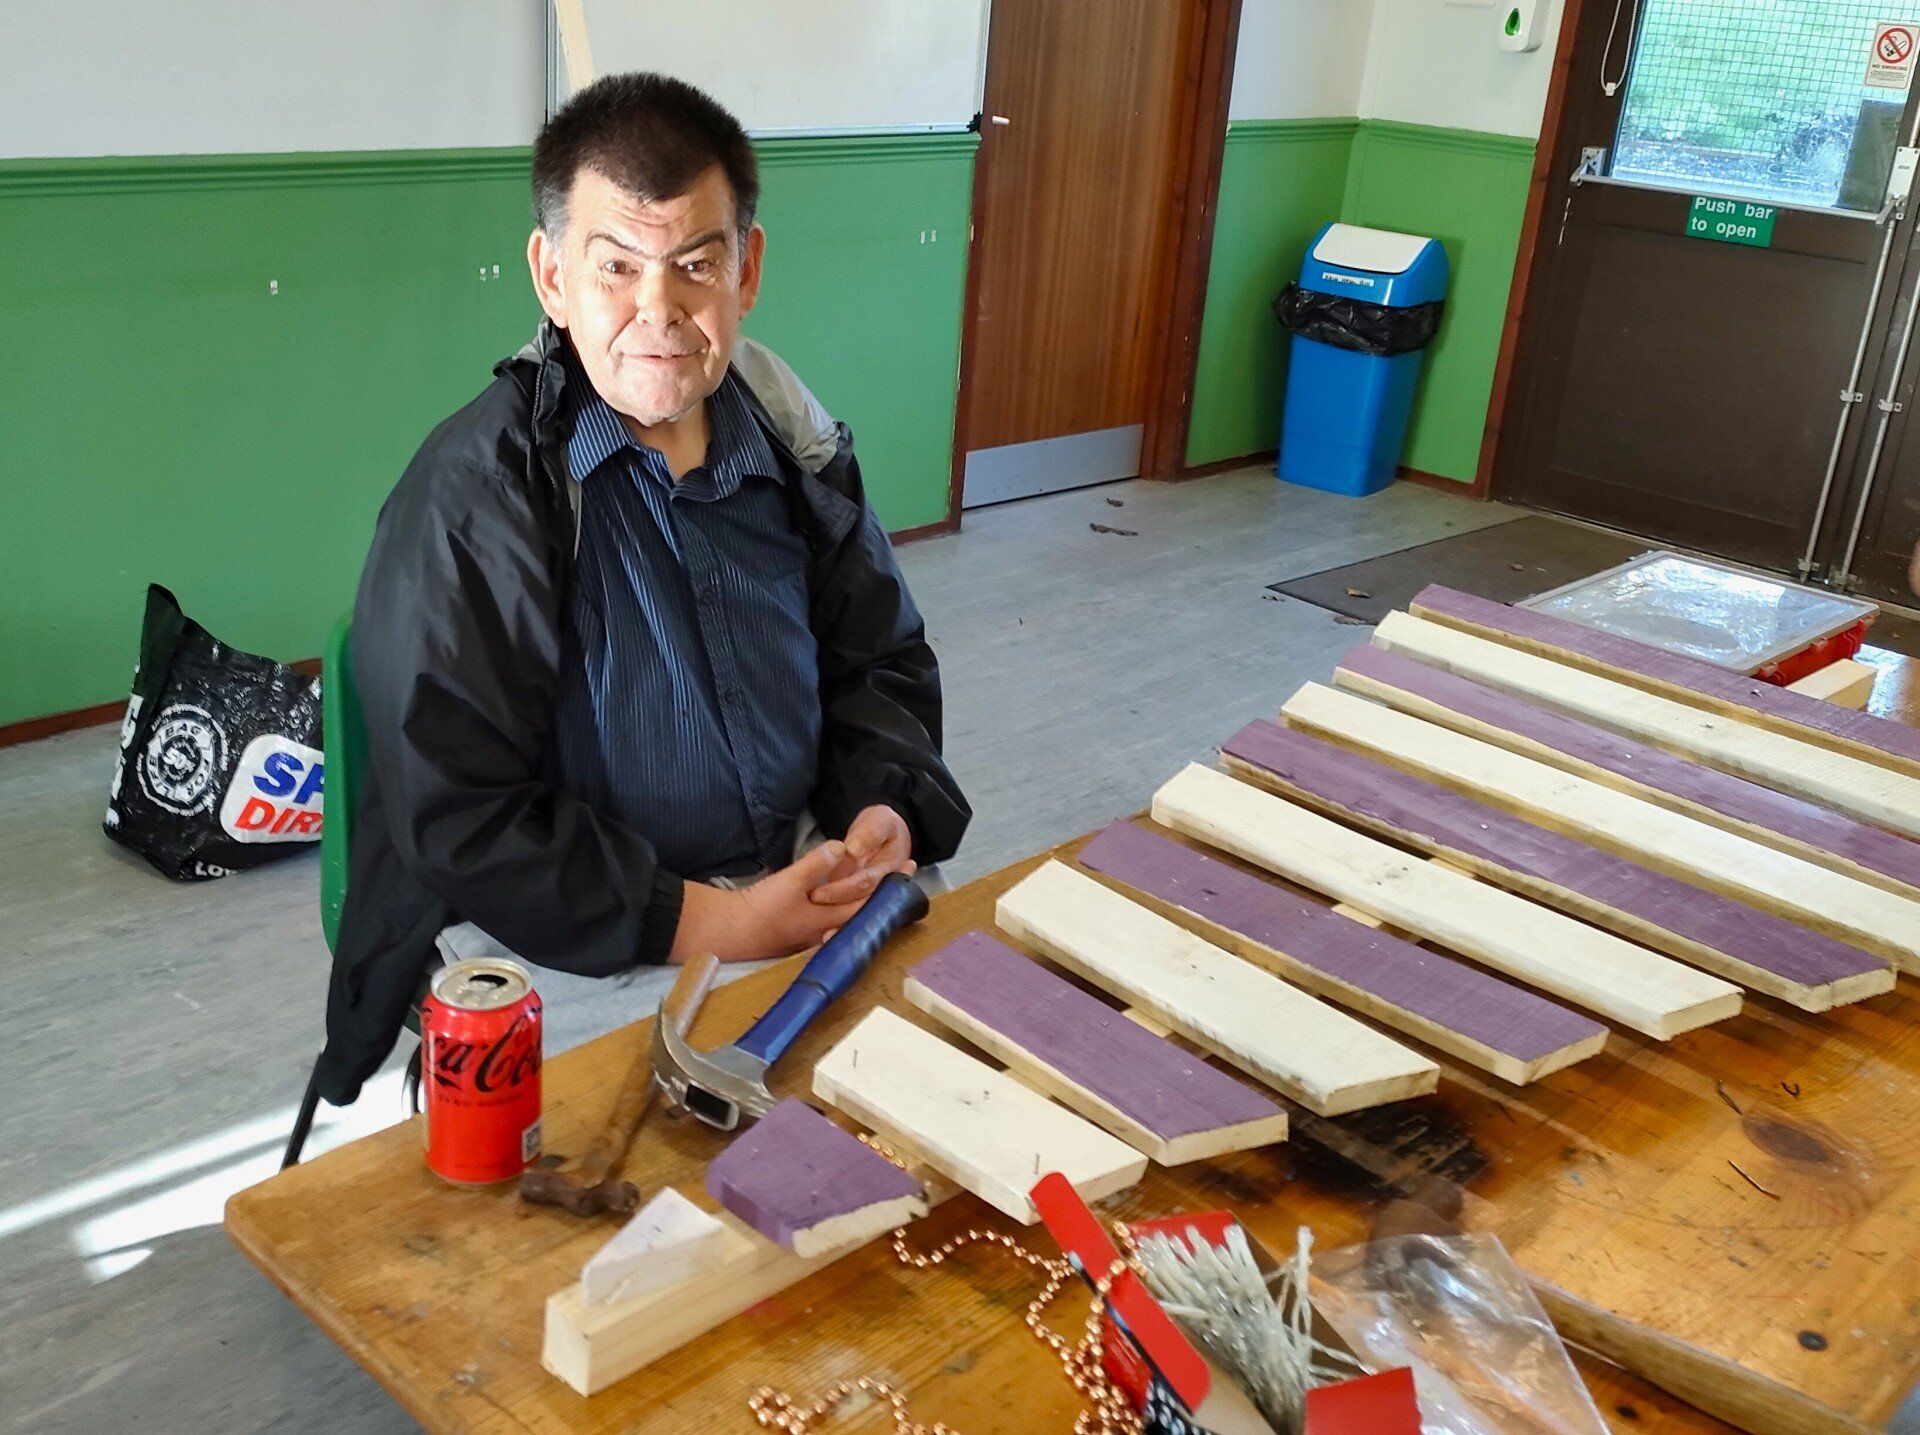 Smiling male FNC member sat at table with hammers resting on table .  Large bands of alternate purple and white painted wood nailed to central piece for a triangular tree shape that fills the table.